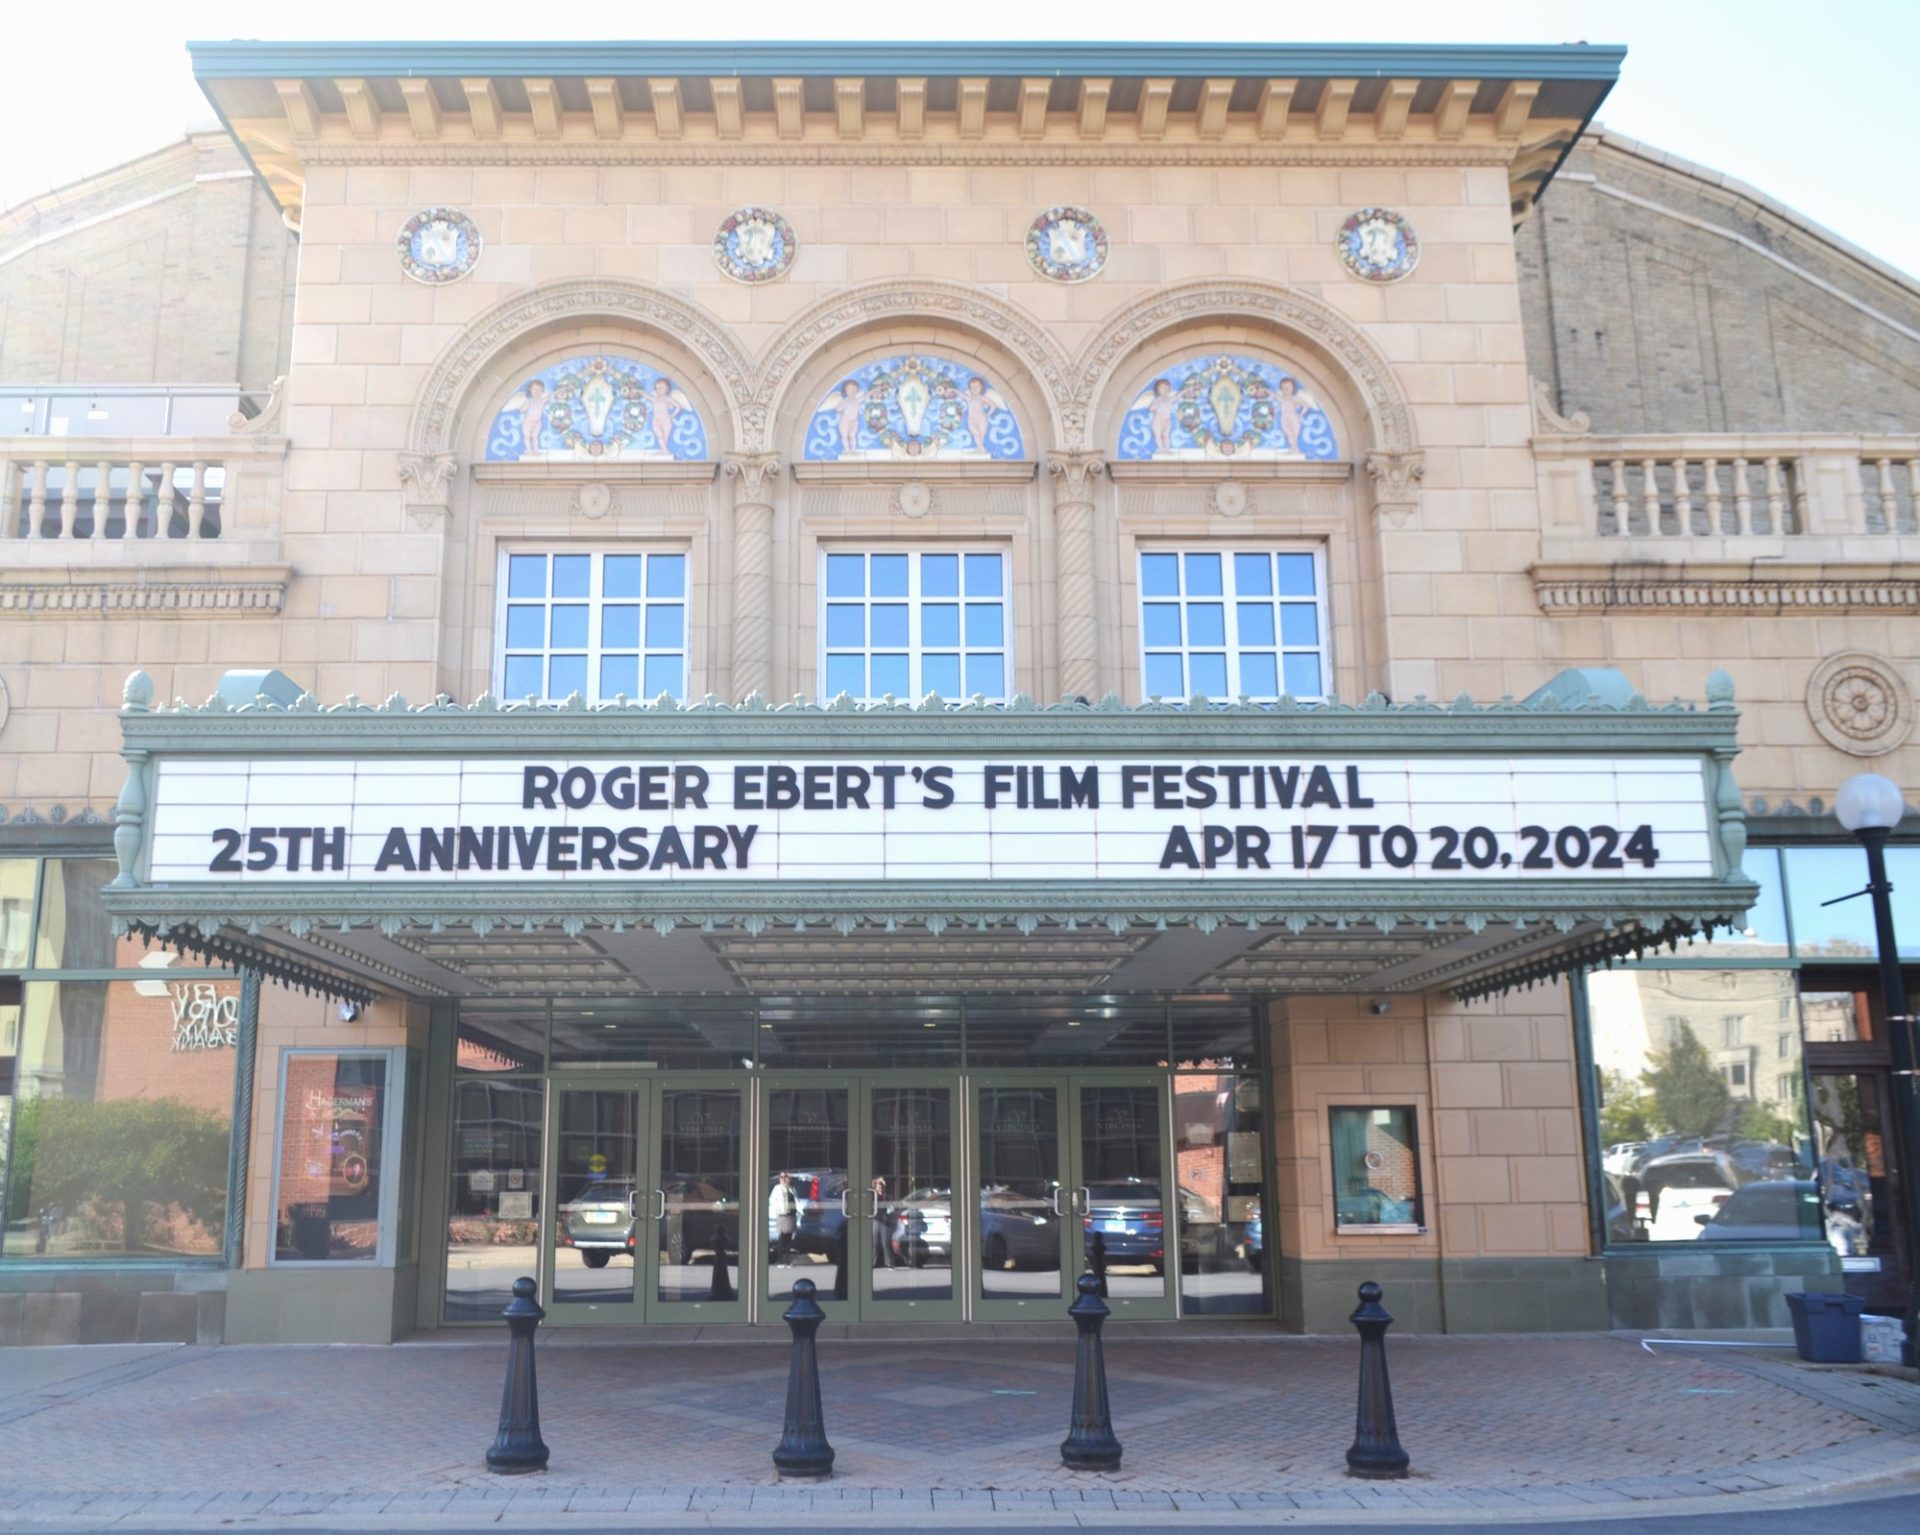 Instagram Story Takeover with Ebertfest